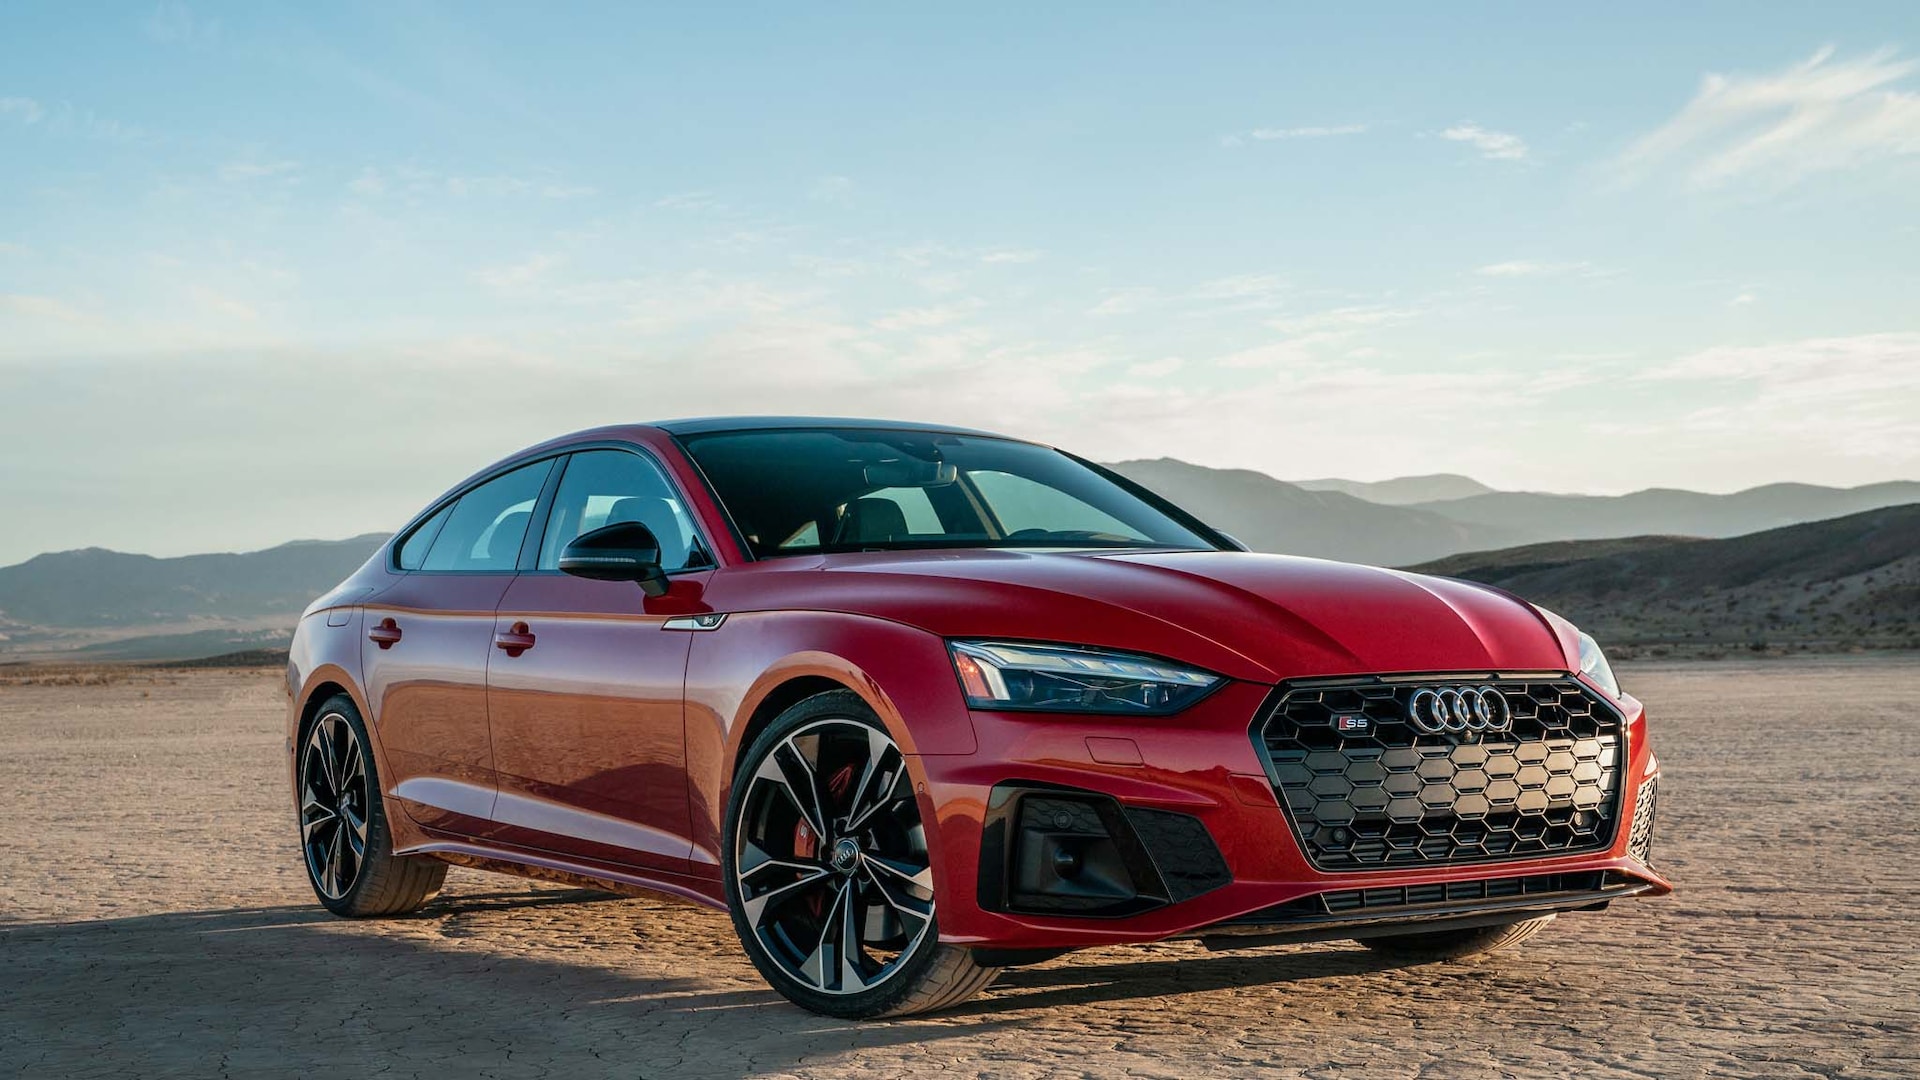 2020 Audi S5 Prices, Reviews, and Photos - MotorTrend